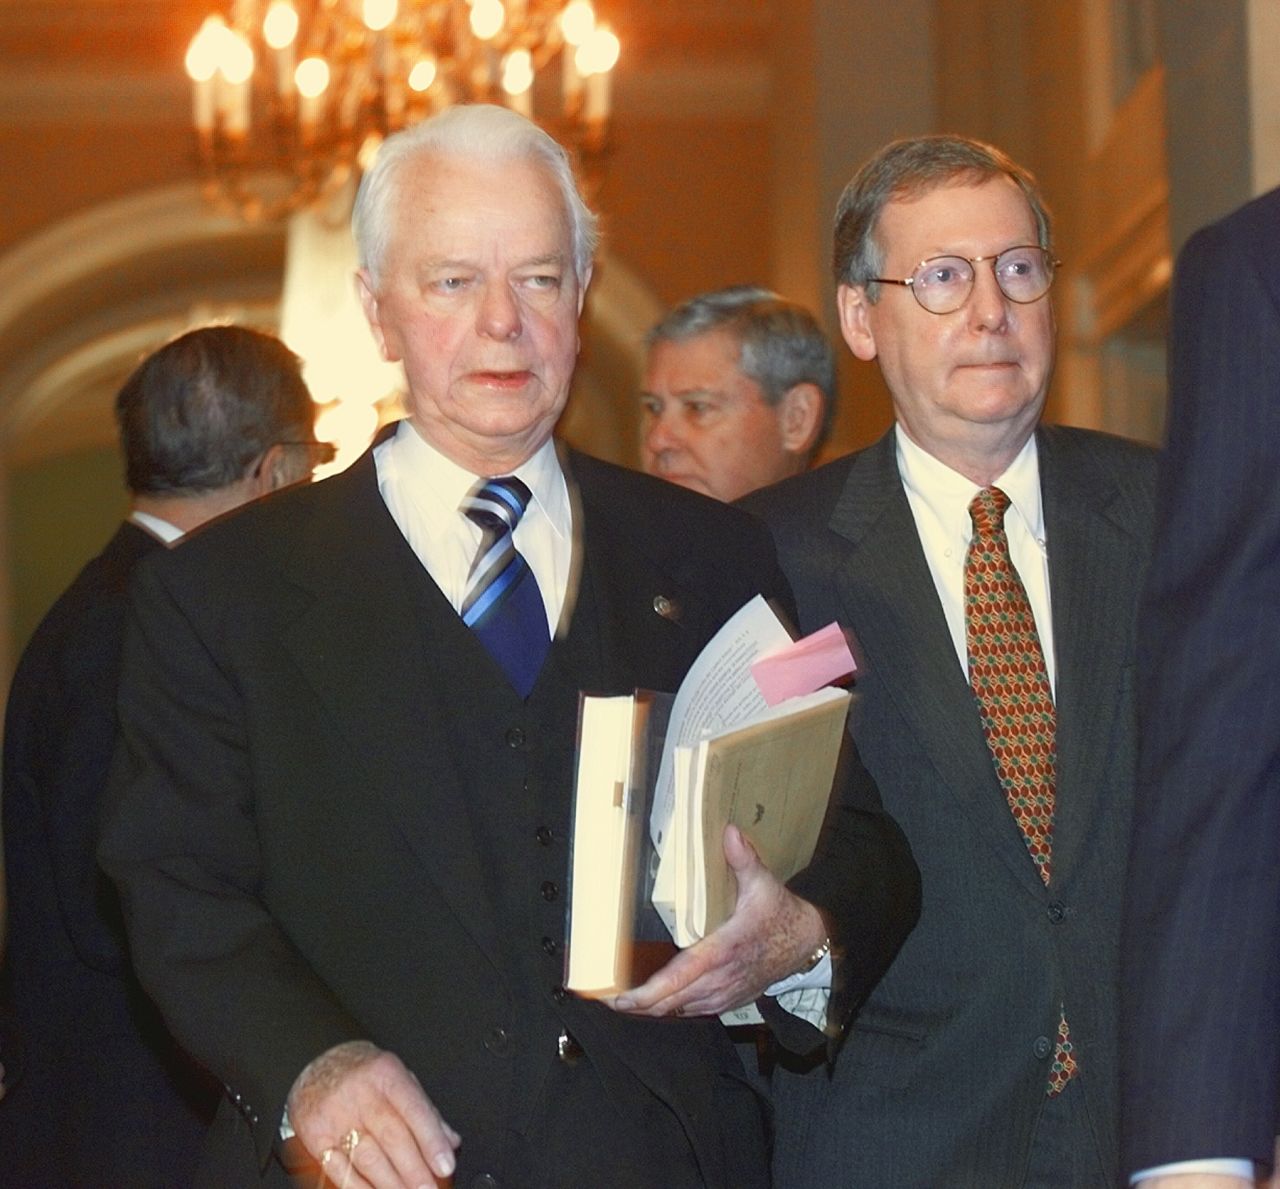 Sen. Robert Byrd, D-West Virginia, and McConnell enter the "Old Senate Chamber" in January 1999 to attend a bipartisan caucus to possibly establish rules and guidelines for the impeachment trial of President Bill Clinton.